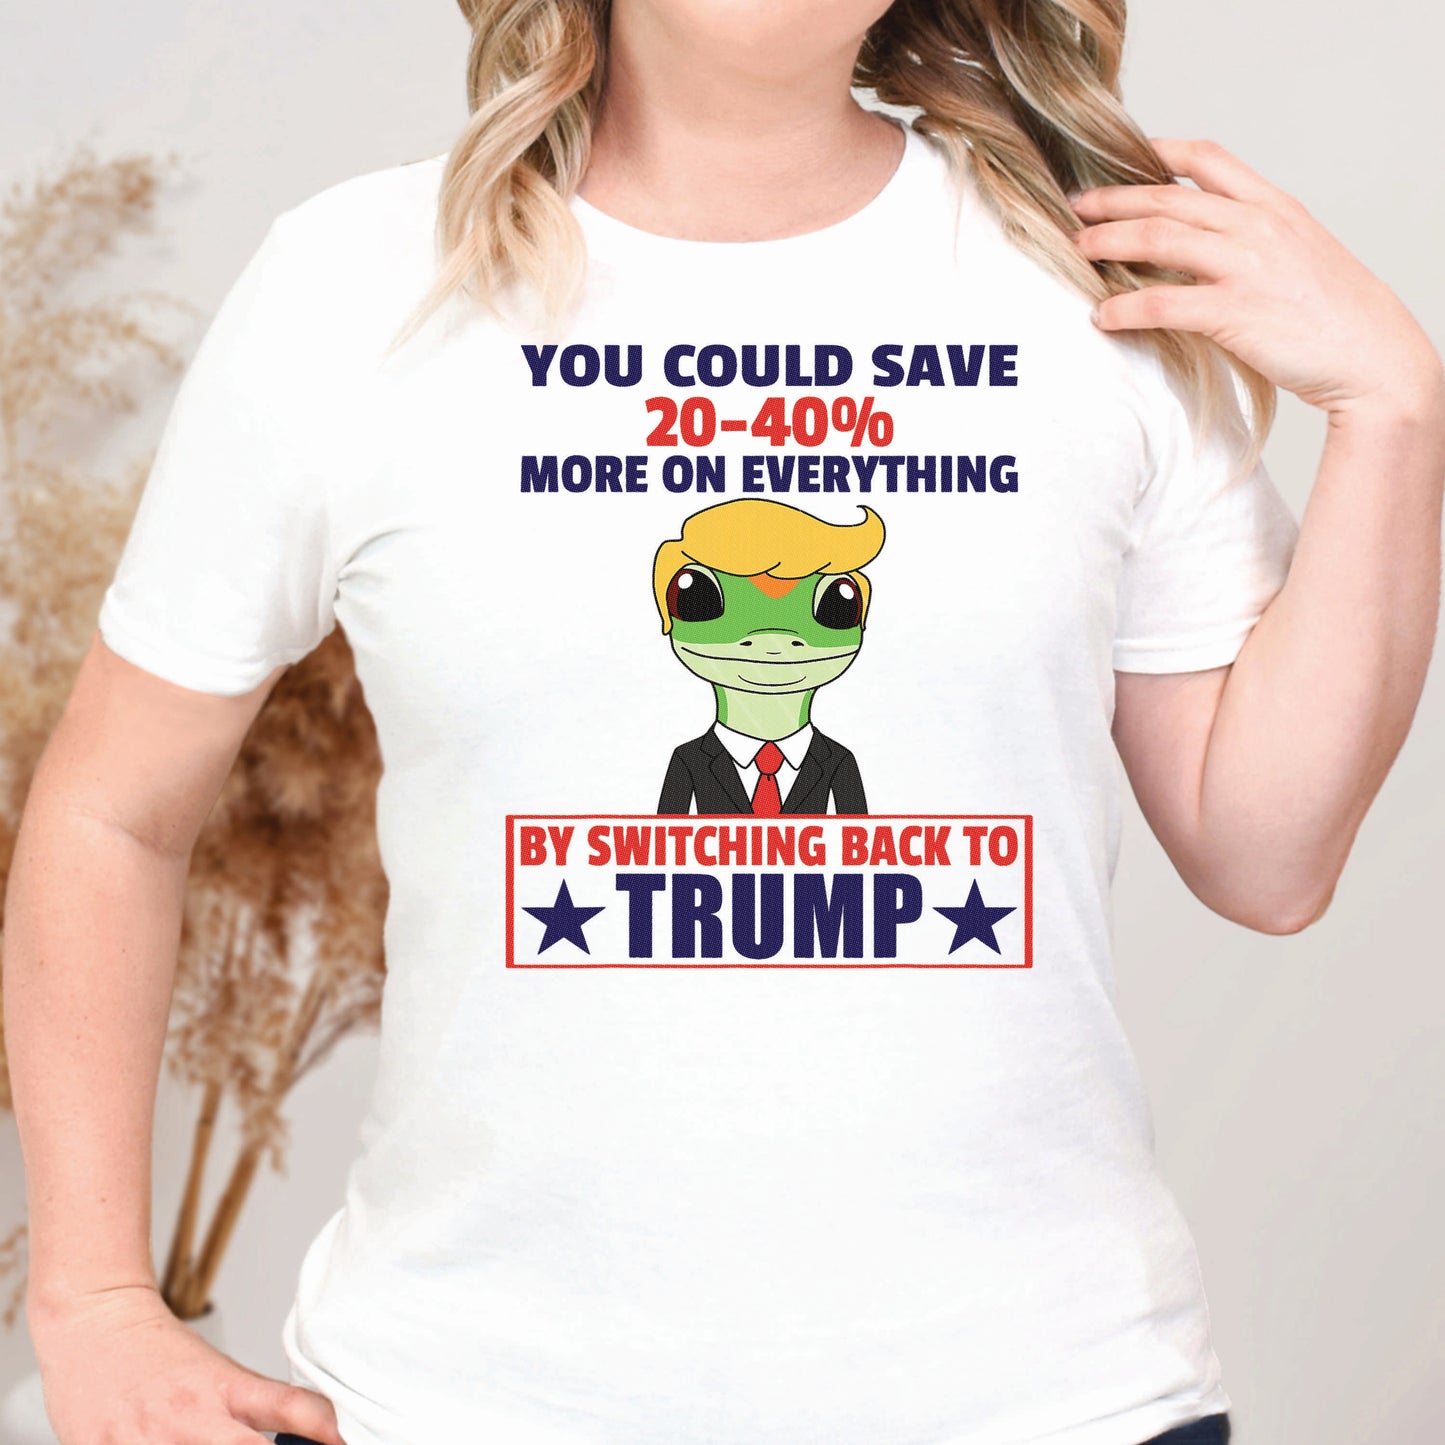 You Could Save by Switching Back to Trump (DTF) 937